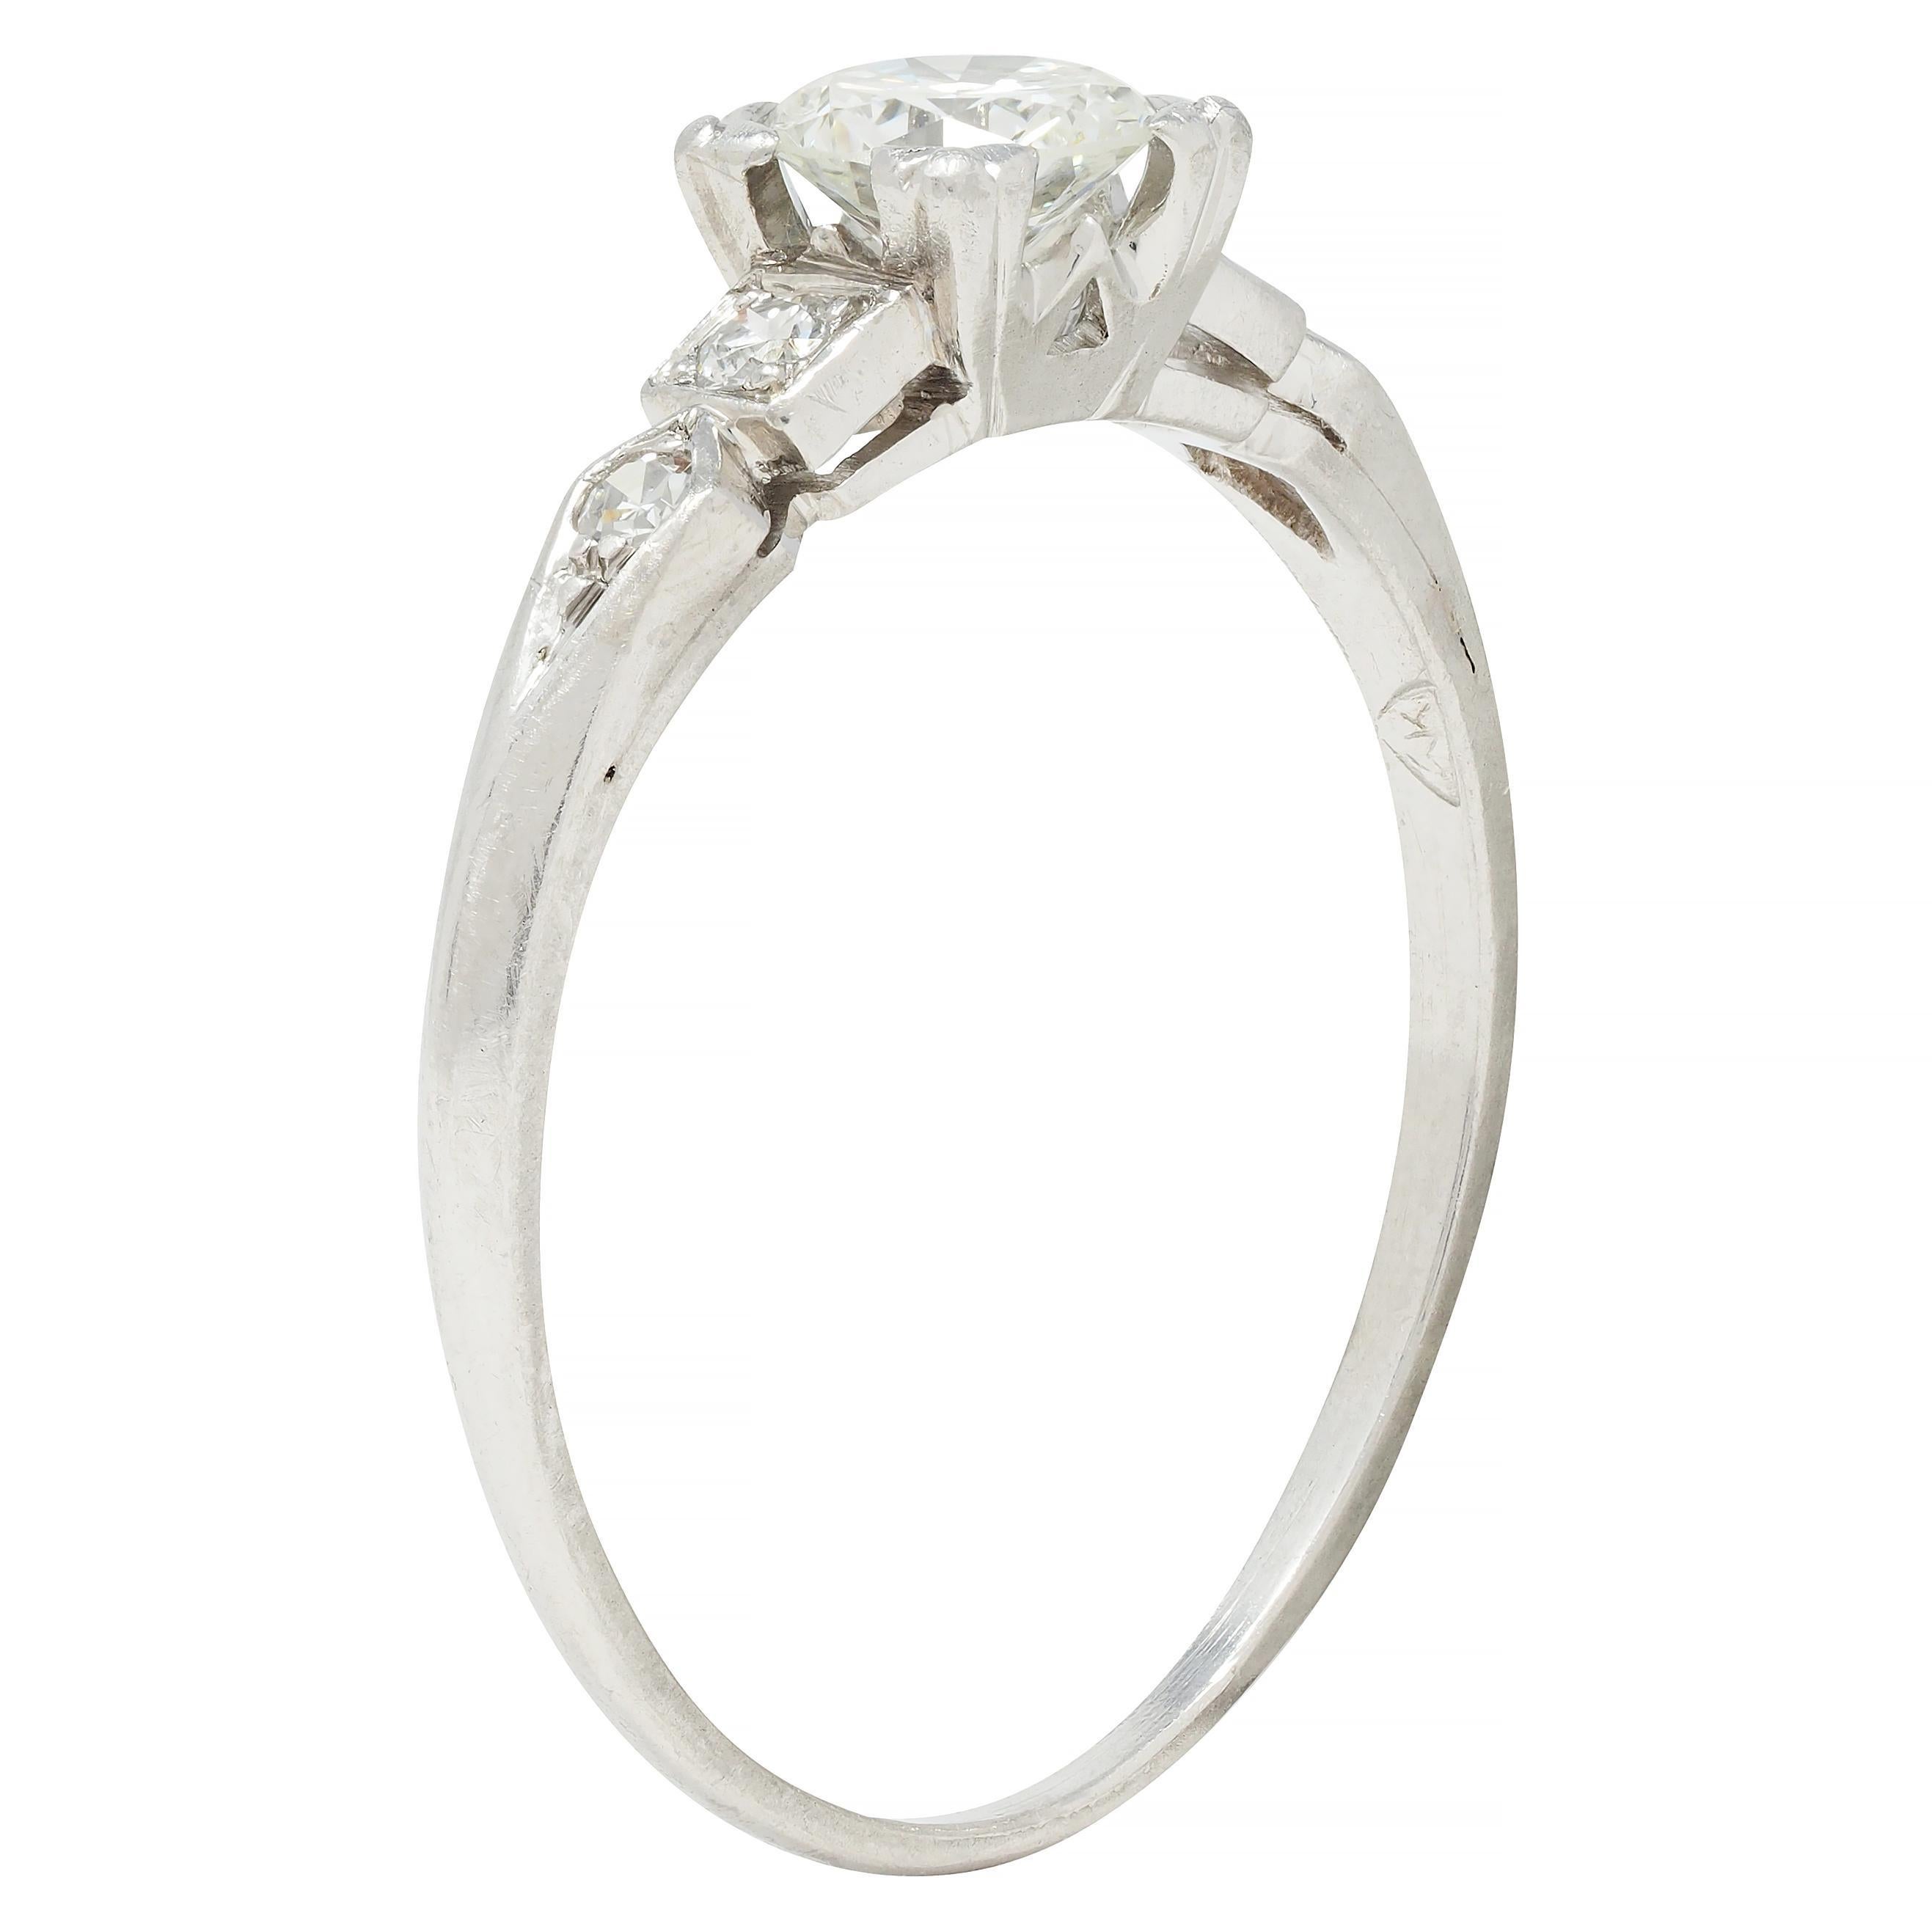 Centering a transitional cut diamond weighing approximately 0.41 carat total - I color with VS2 clarity
Set with tri-split prongs in a square form basket with a pierced 'W' motif profile 
Flanked by cathedral shoulders bead set with single cut